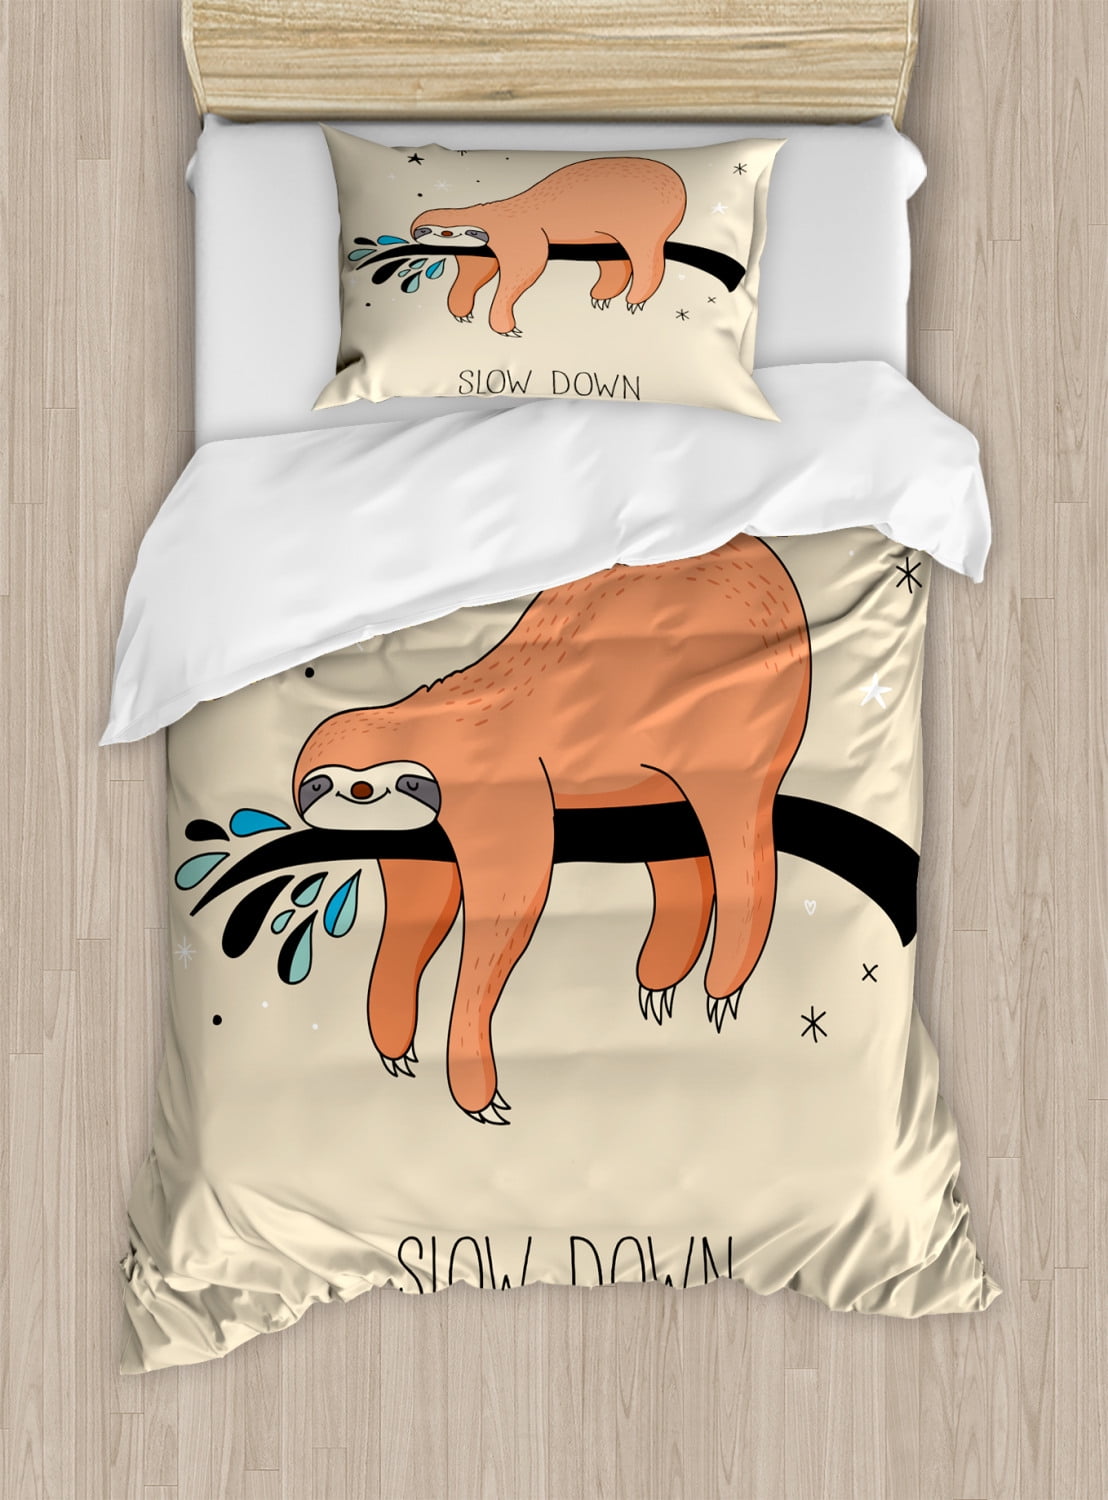 BIG BEAR DUVET COVER SETS SINGLE & DOUBLE AVAILABLE NEW ANIMAL WILDLIFE BEDDING 